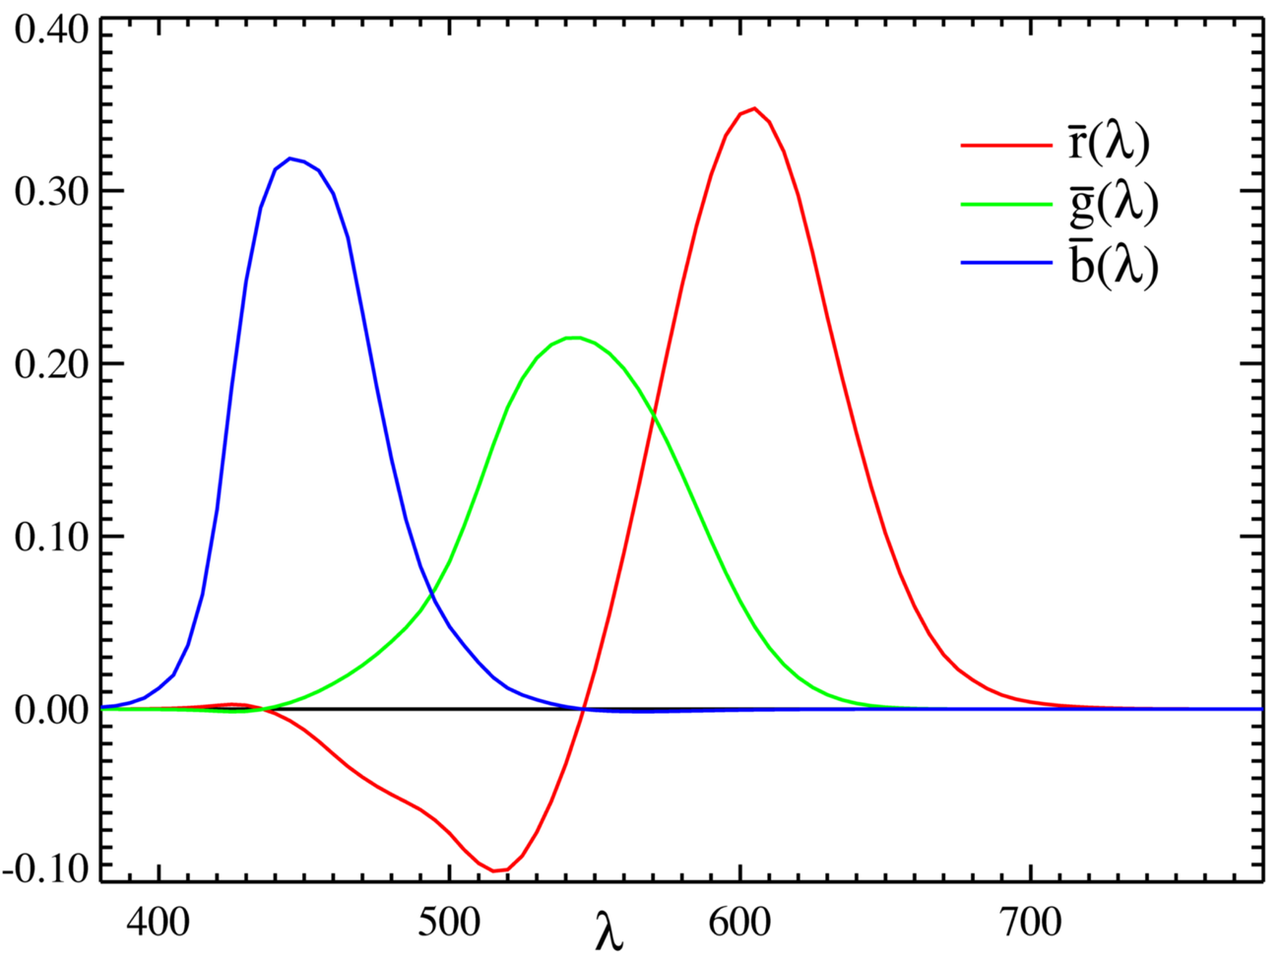 red, green and blue curves over the visible light spectrum.